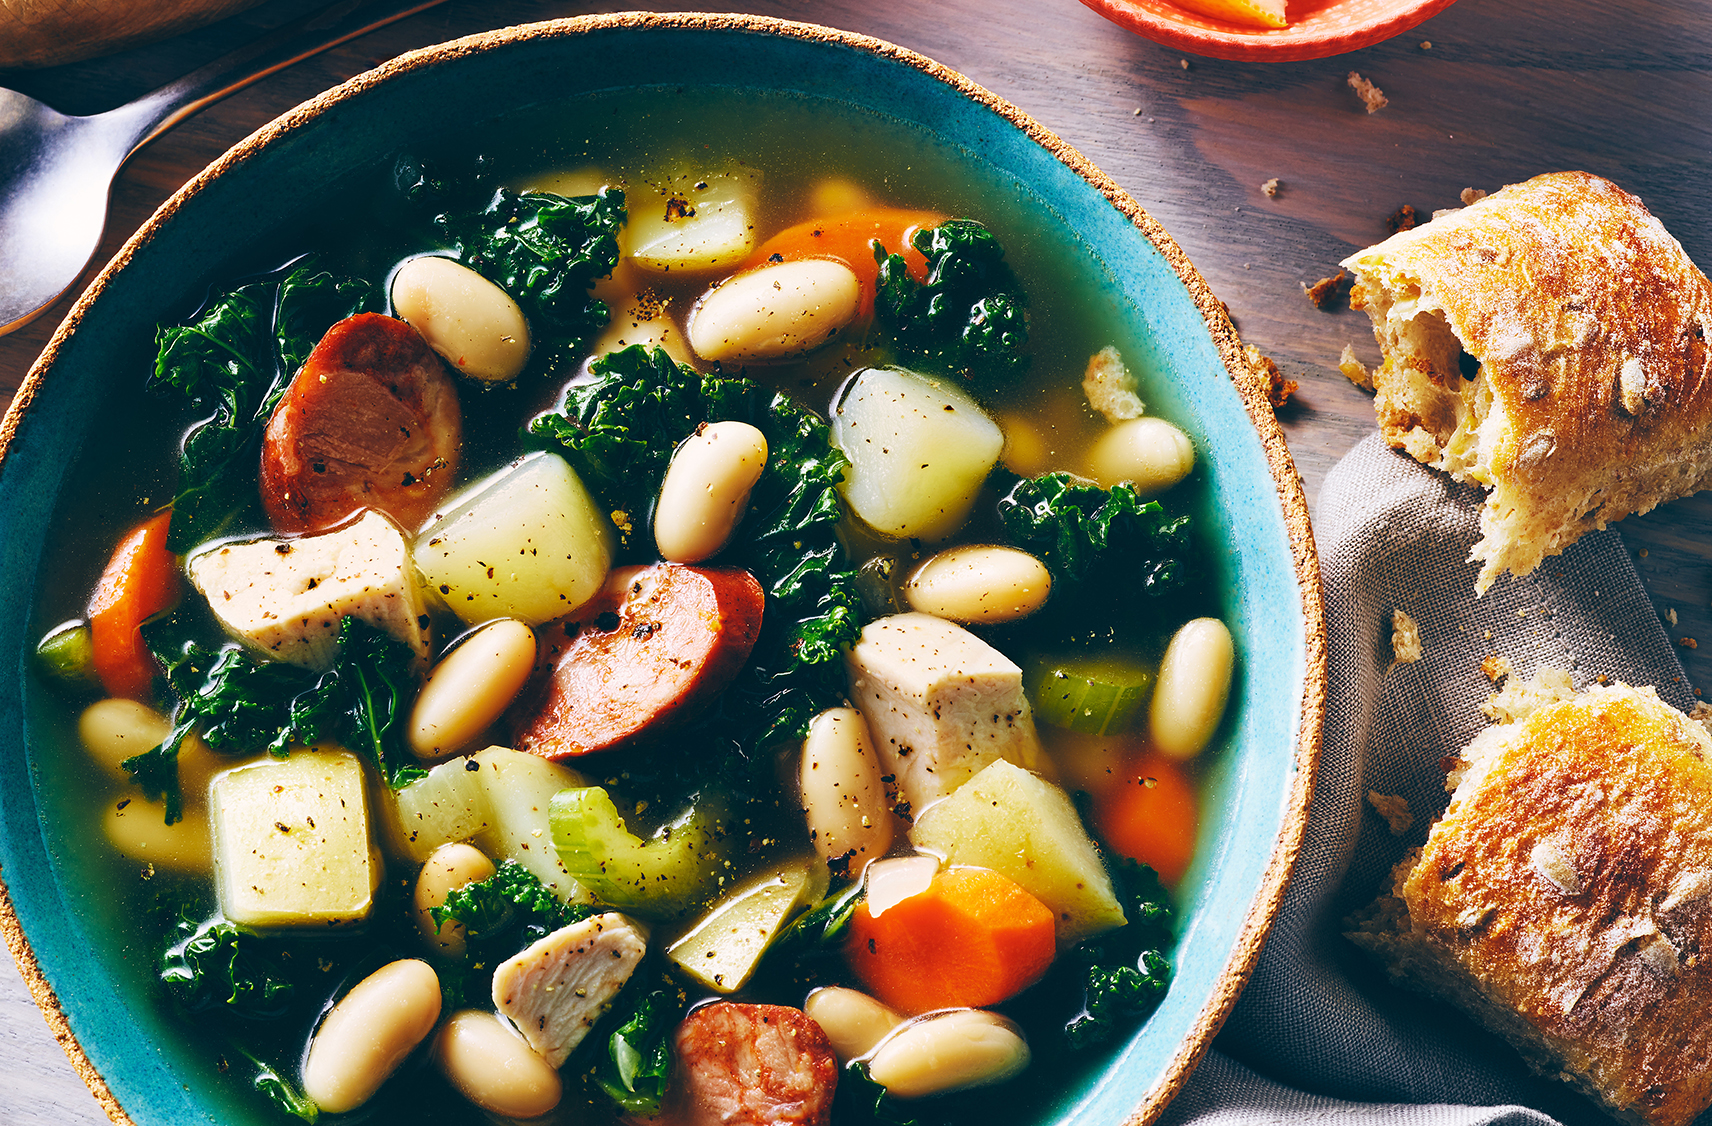 A soup of kale, chorizo, white beans, celery and potato in a clear broth